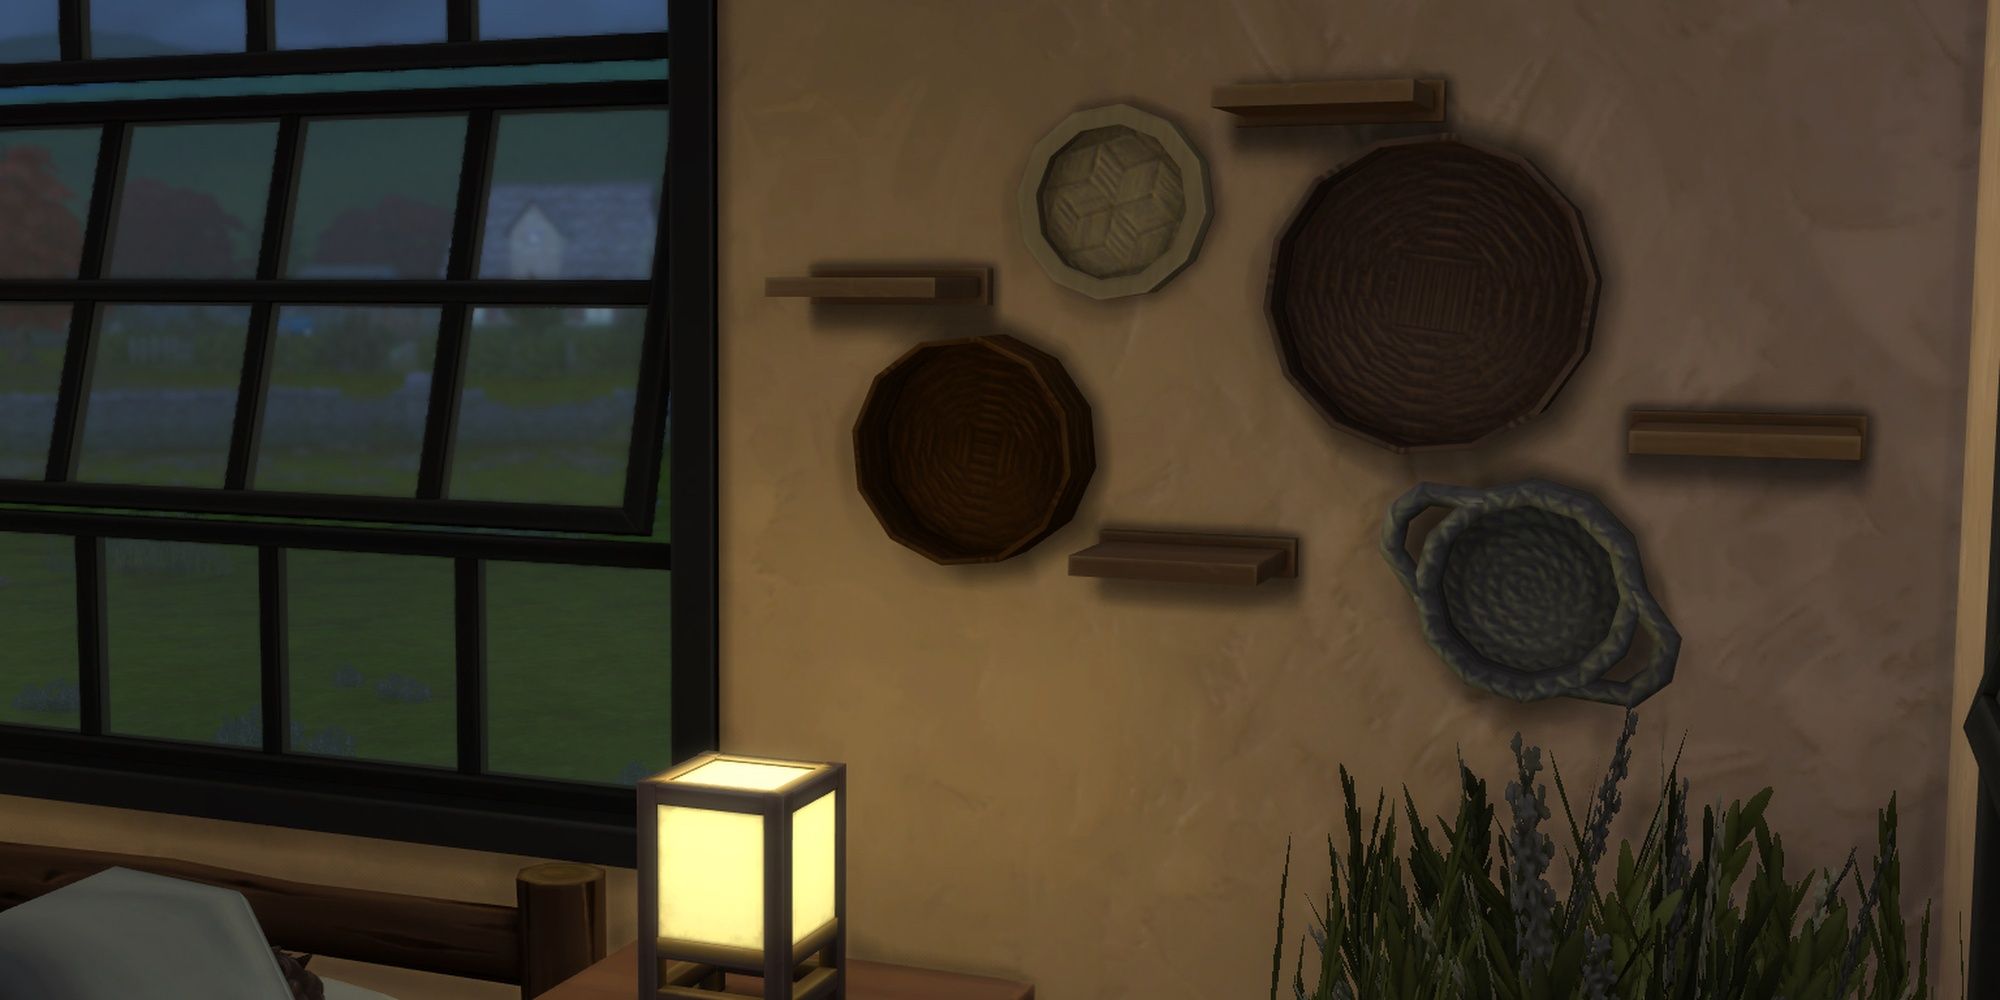 Four wicker baskets in tan, brown and gray mounted on the wall with shelves in The Sims 4.